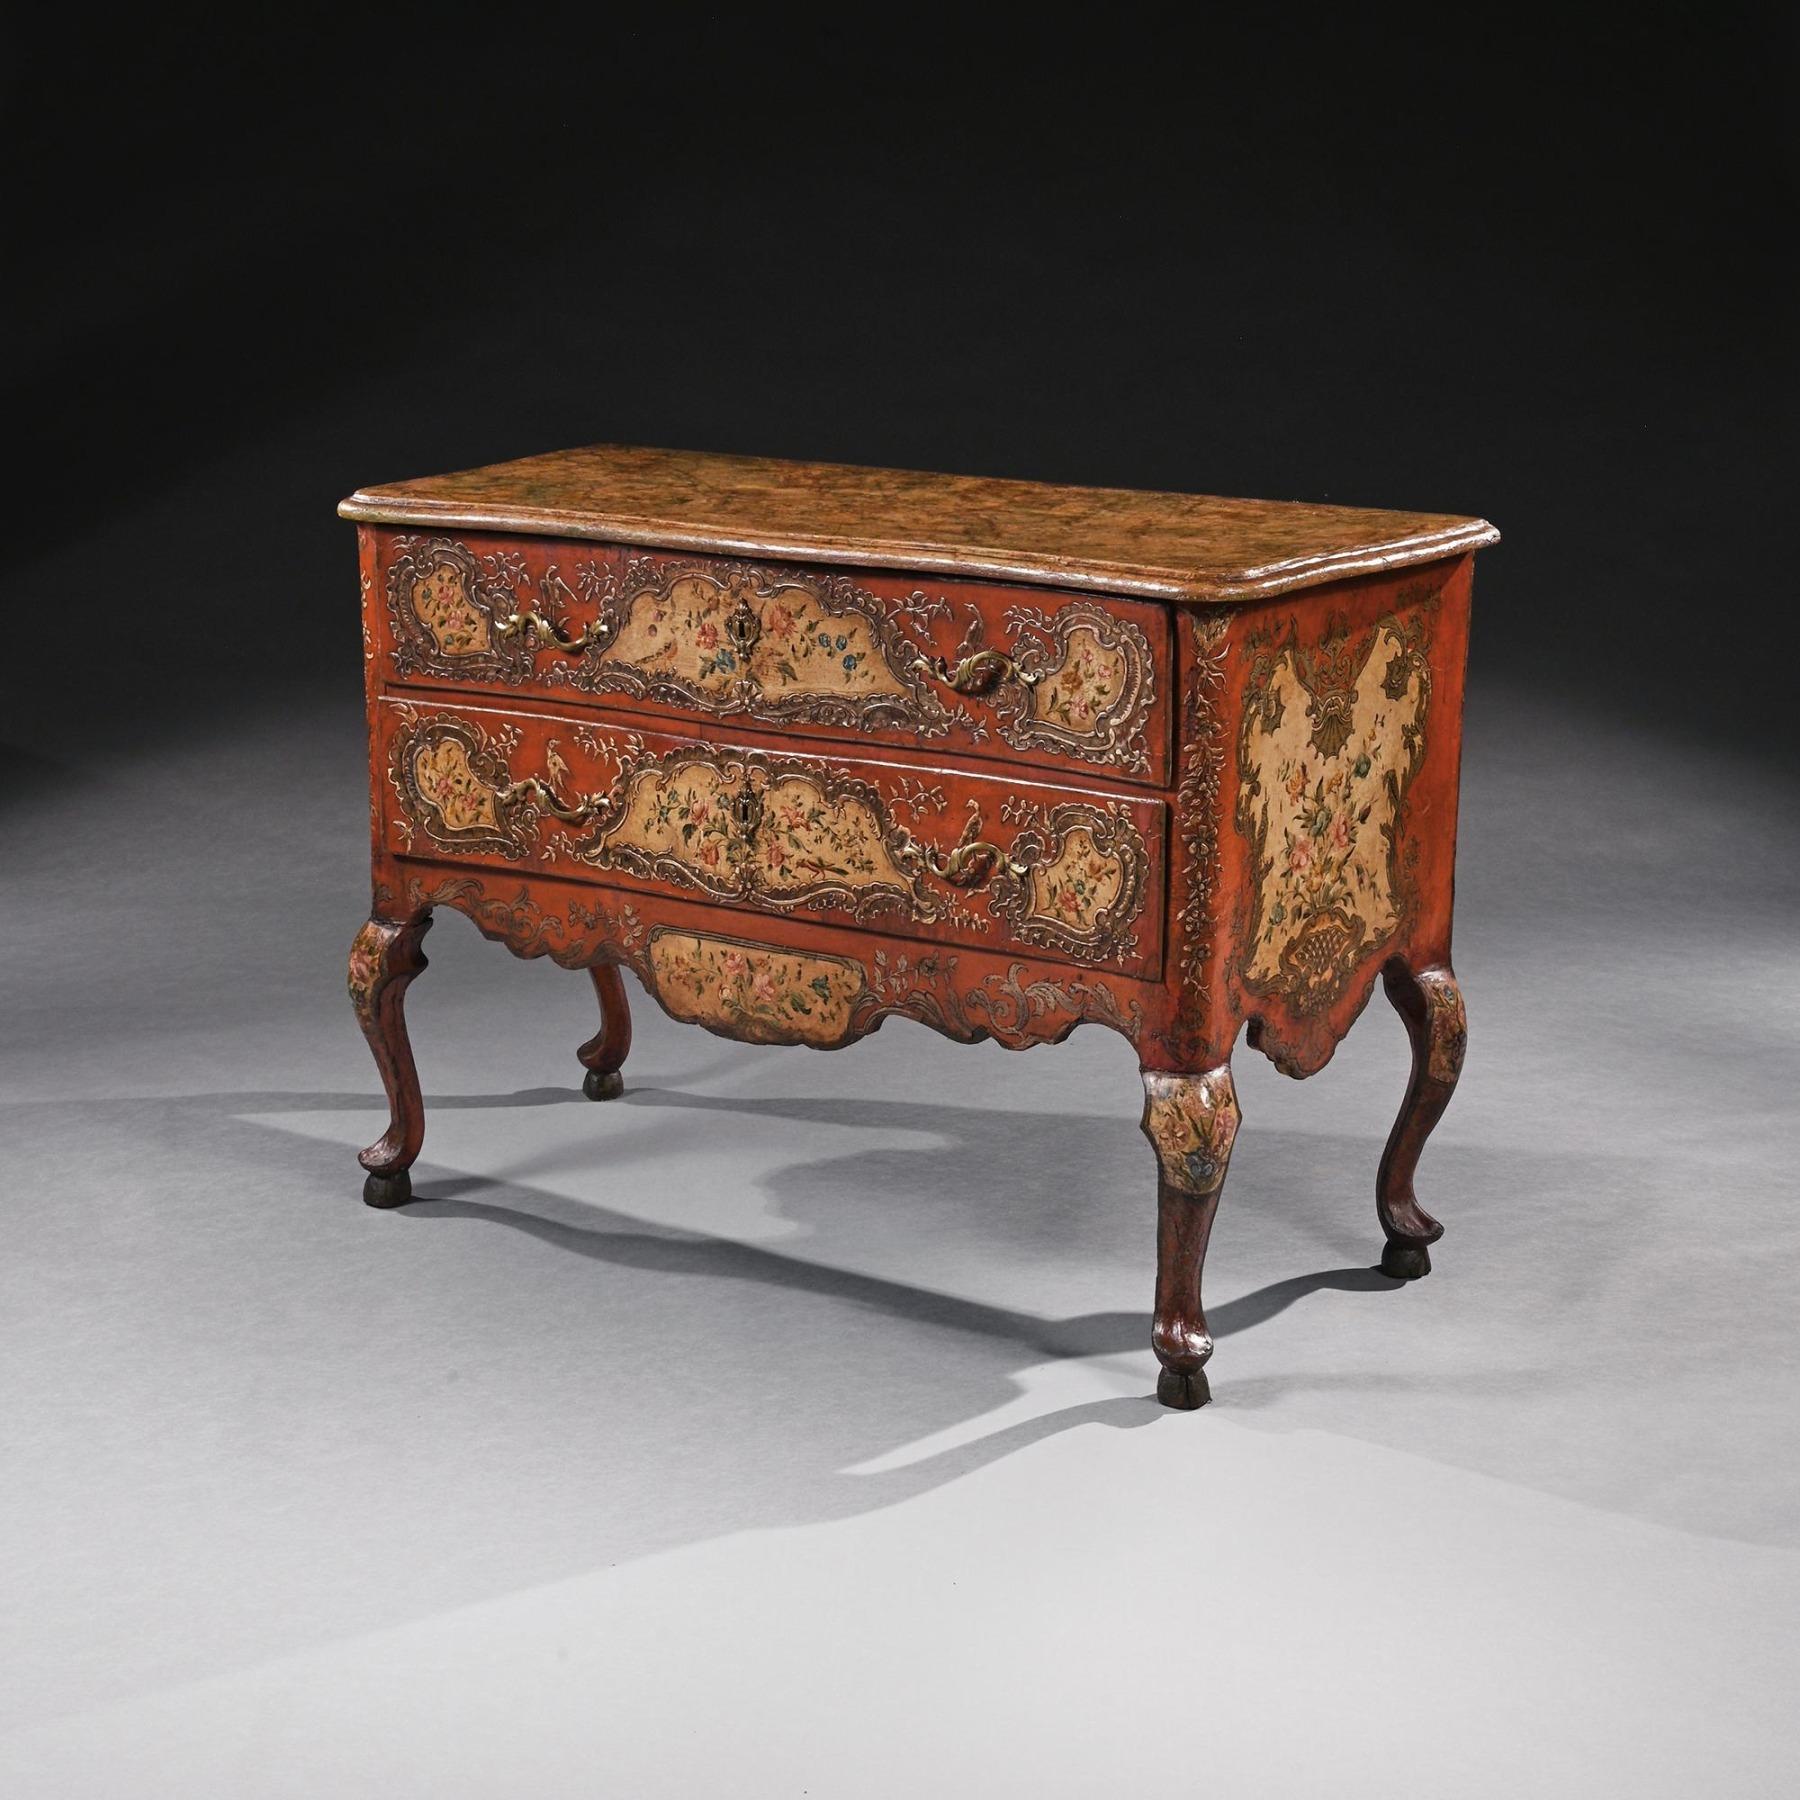 Wood 18th Century Sicilian Polychrome Painted Parcel Gilt Commode